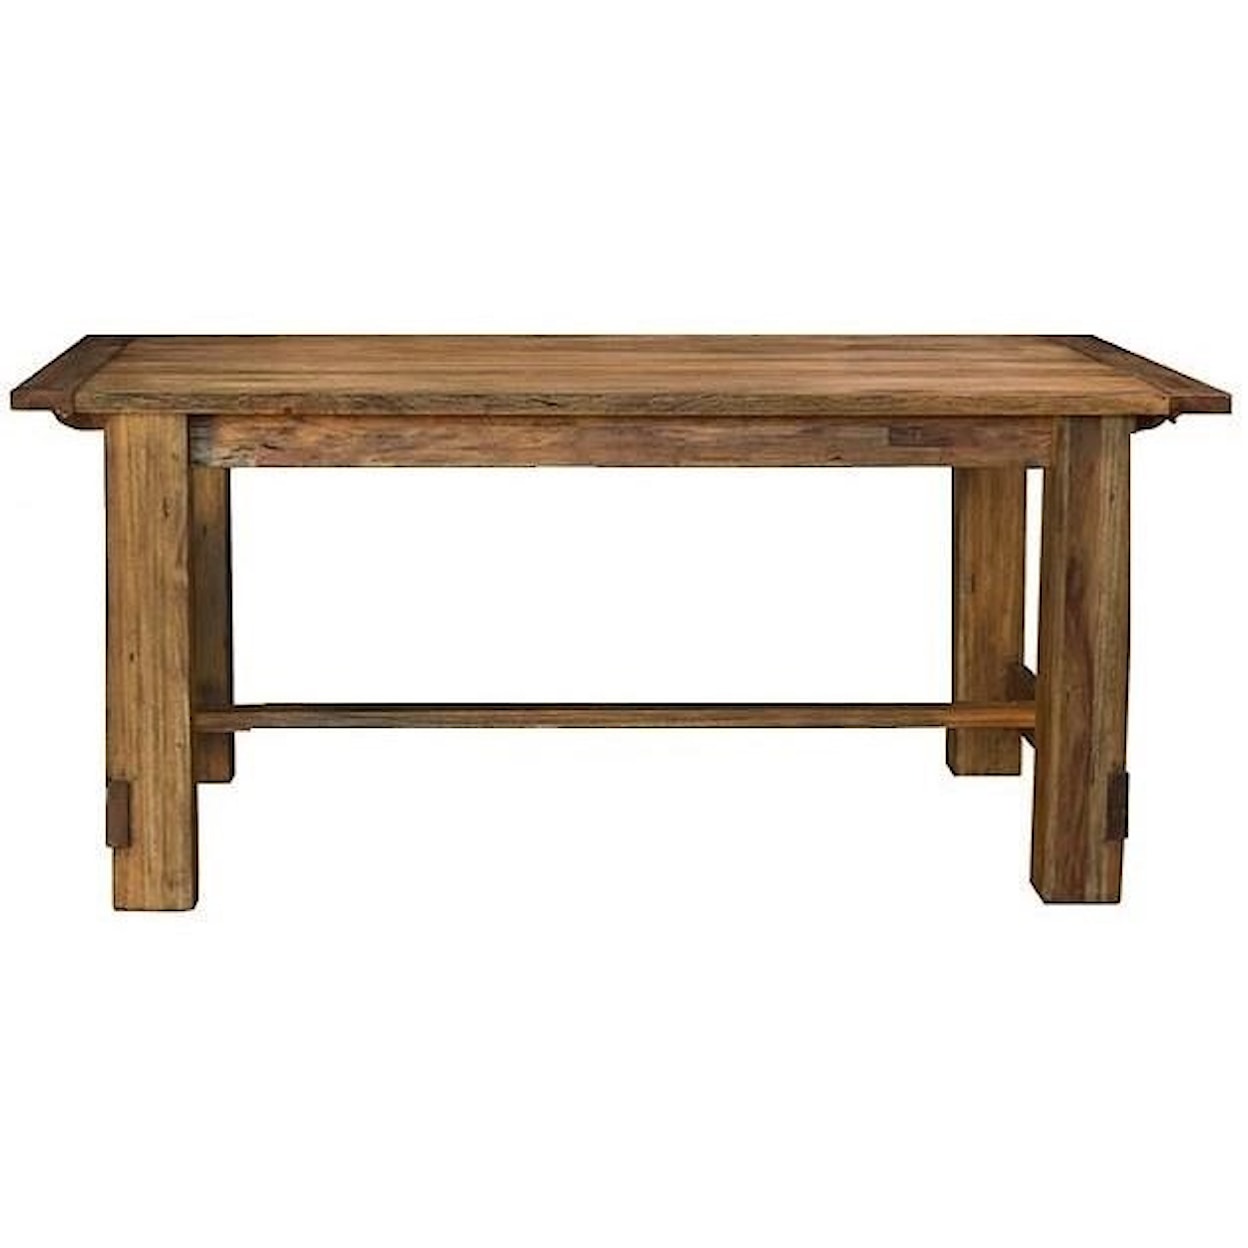 AAmerica Anacortes Trestle Dining Table